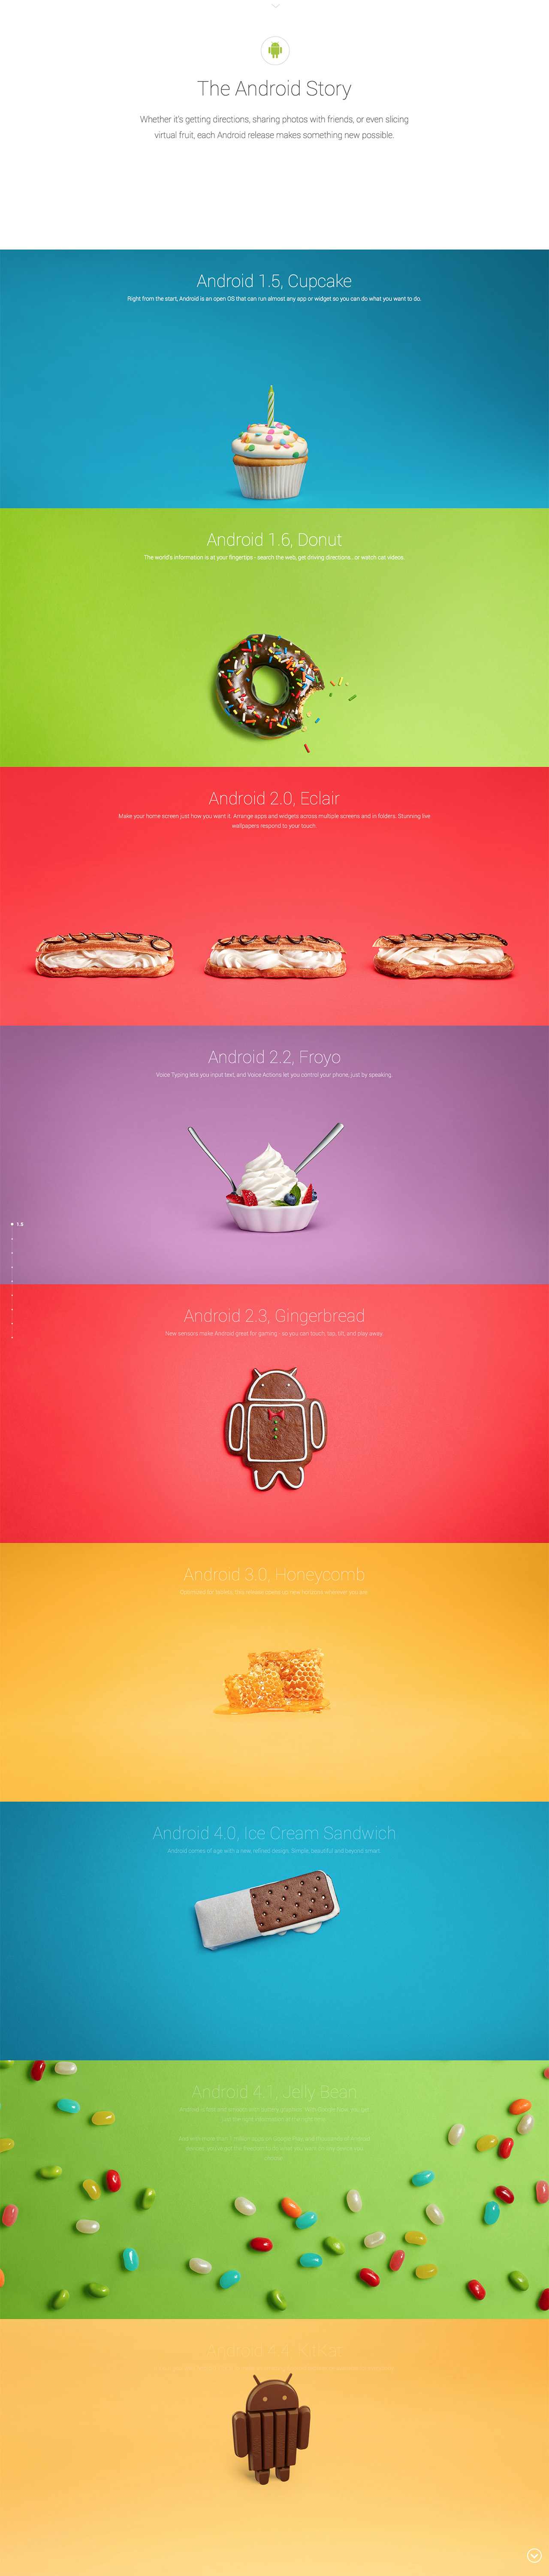 Google Announces Next Version of Android Will Be Called &#039;KitKat&#039;